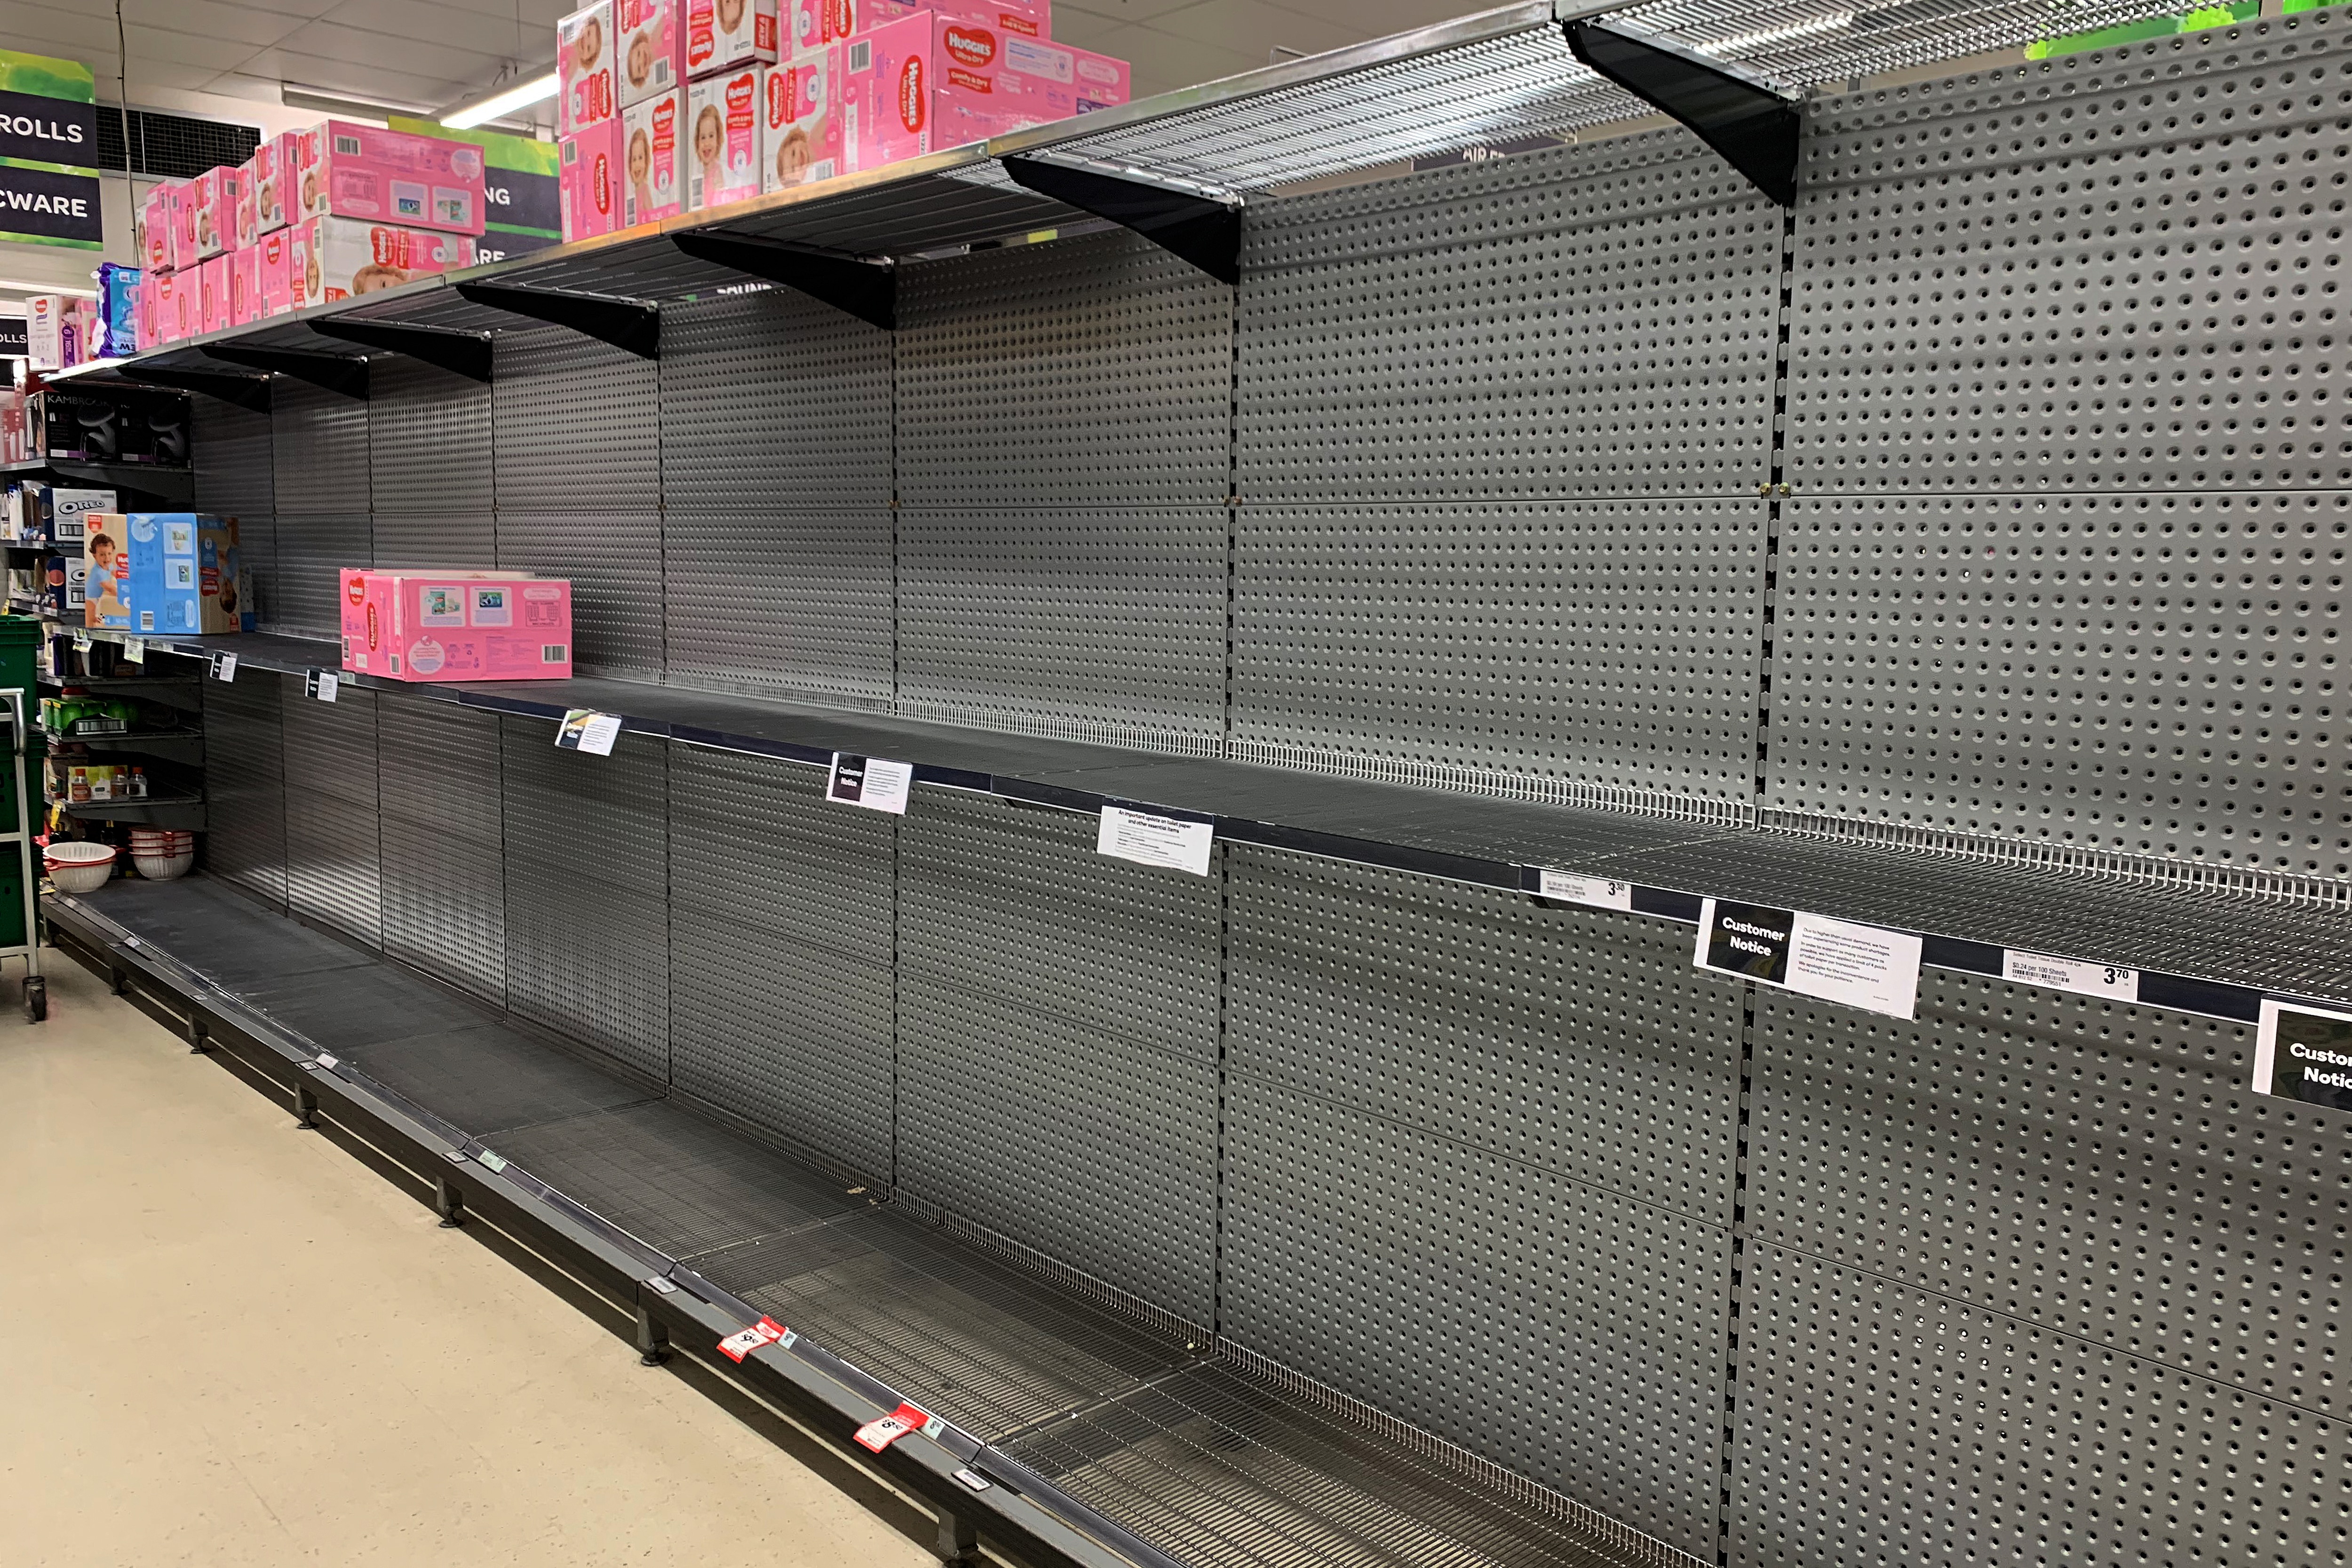 Empty shelves that were once stocked with toilet paper are seen in Balmain Woolworths, Sydney, Saturday, March 7, 2020. Australians are stockpiling toilet paper over Coronavirus fears. (AAP Image/Bianca De Marchi) NO ARCHIVING